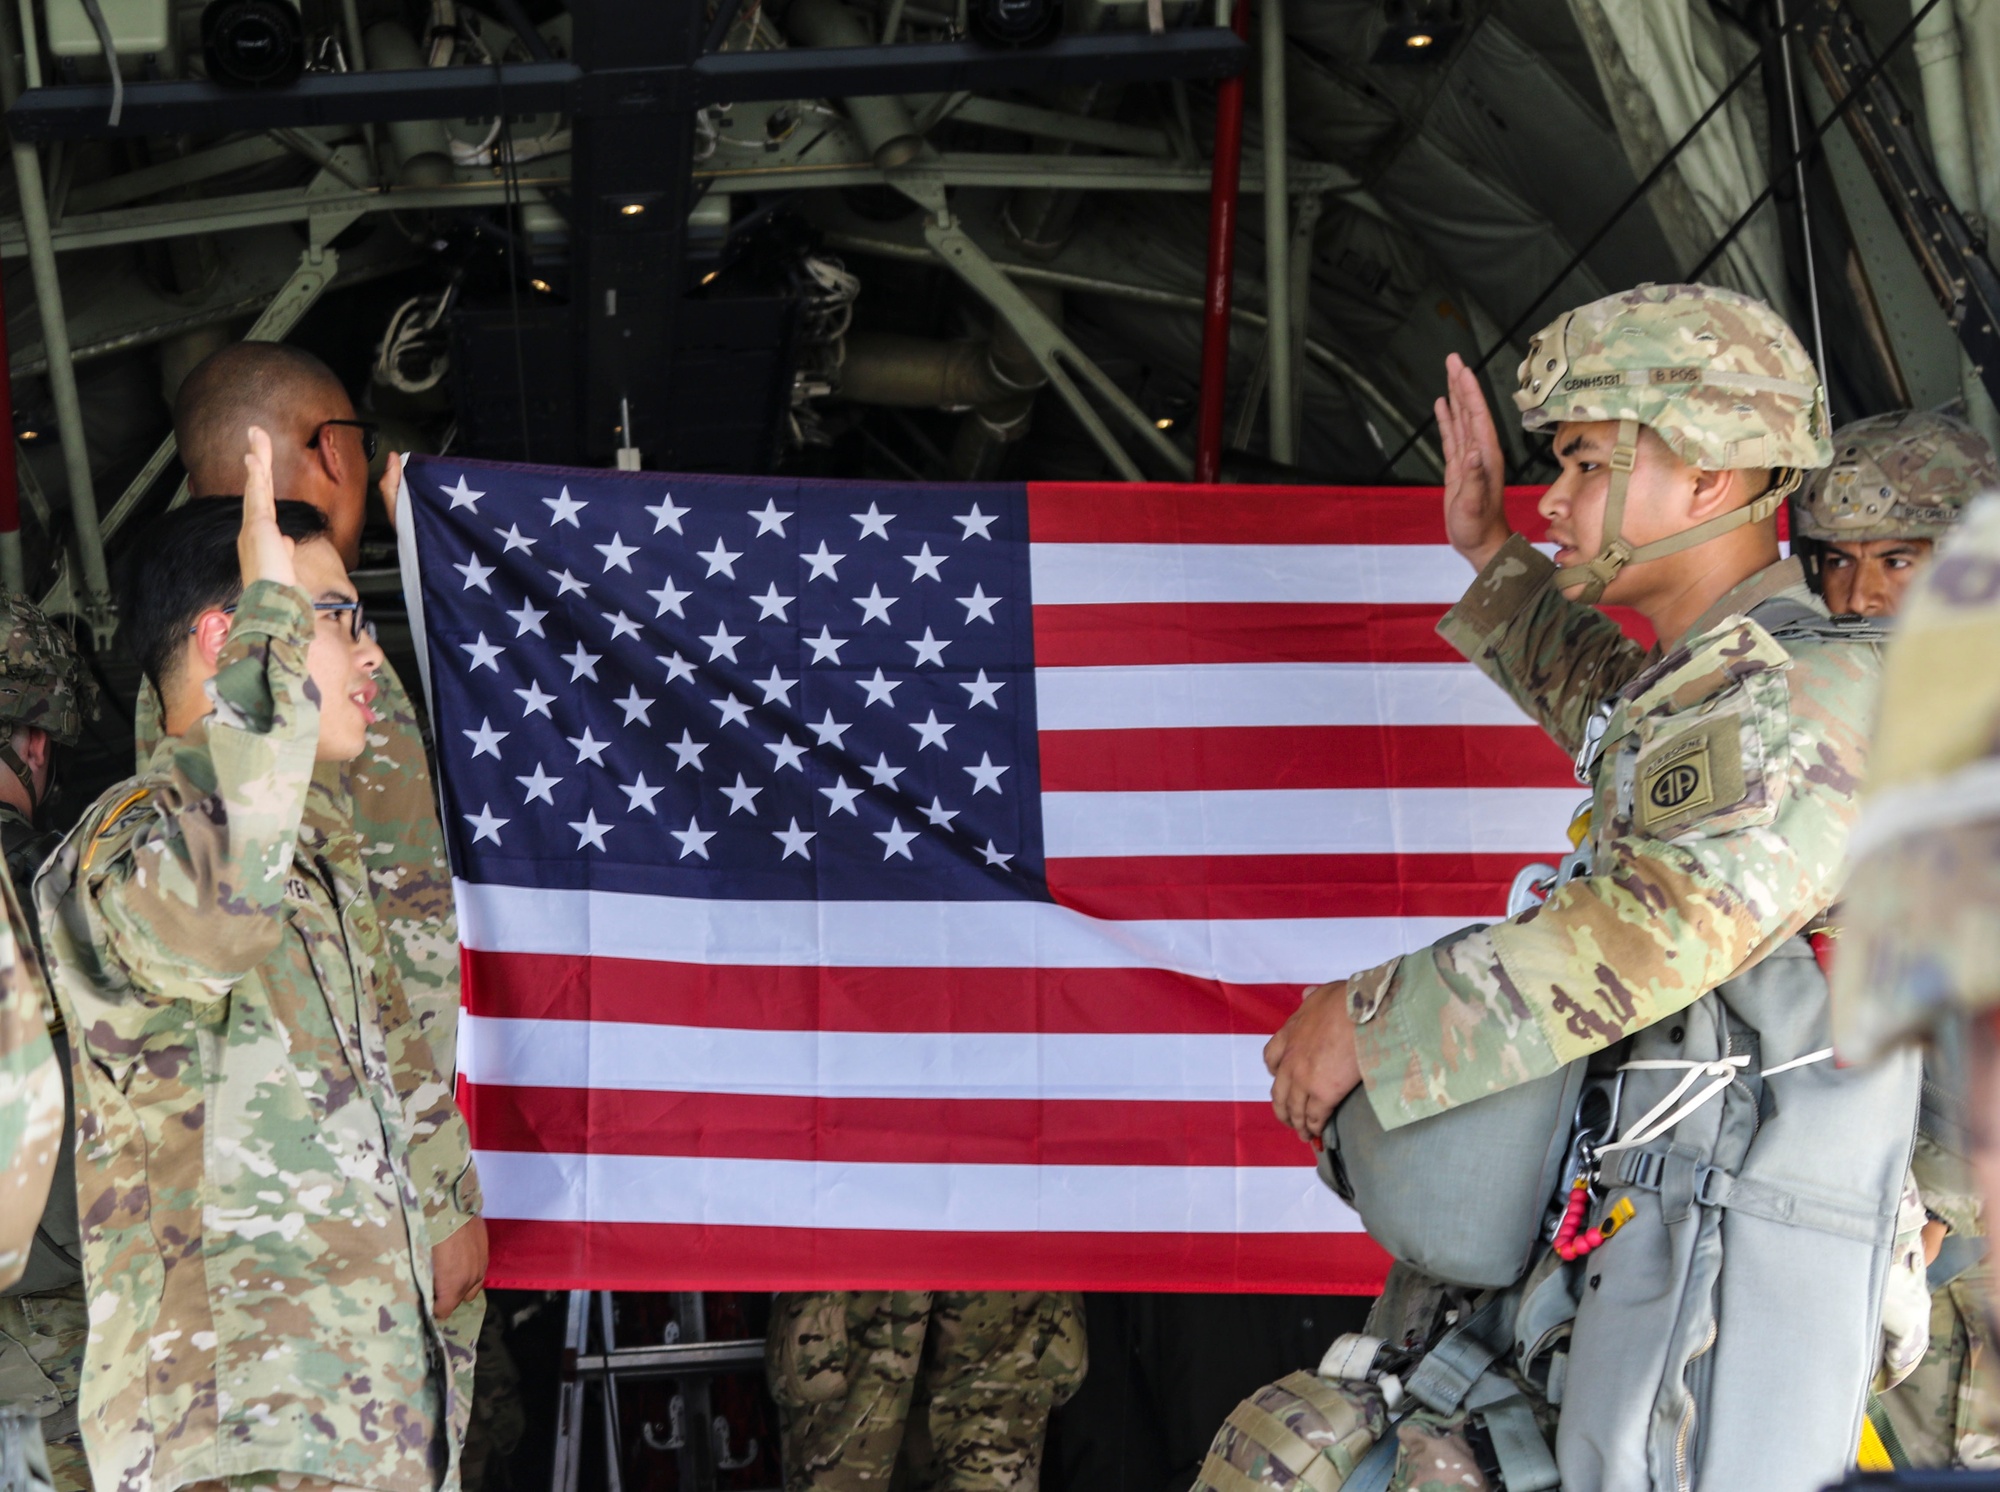 DVIDS - Images - 3BCT, 82ABN Conduct C-130 Jumps [Image 11 of 11]